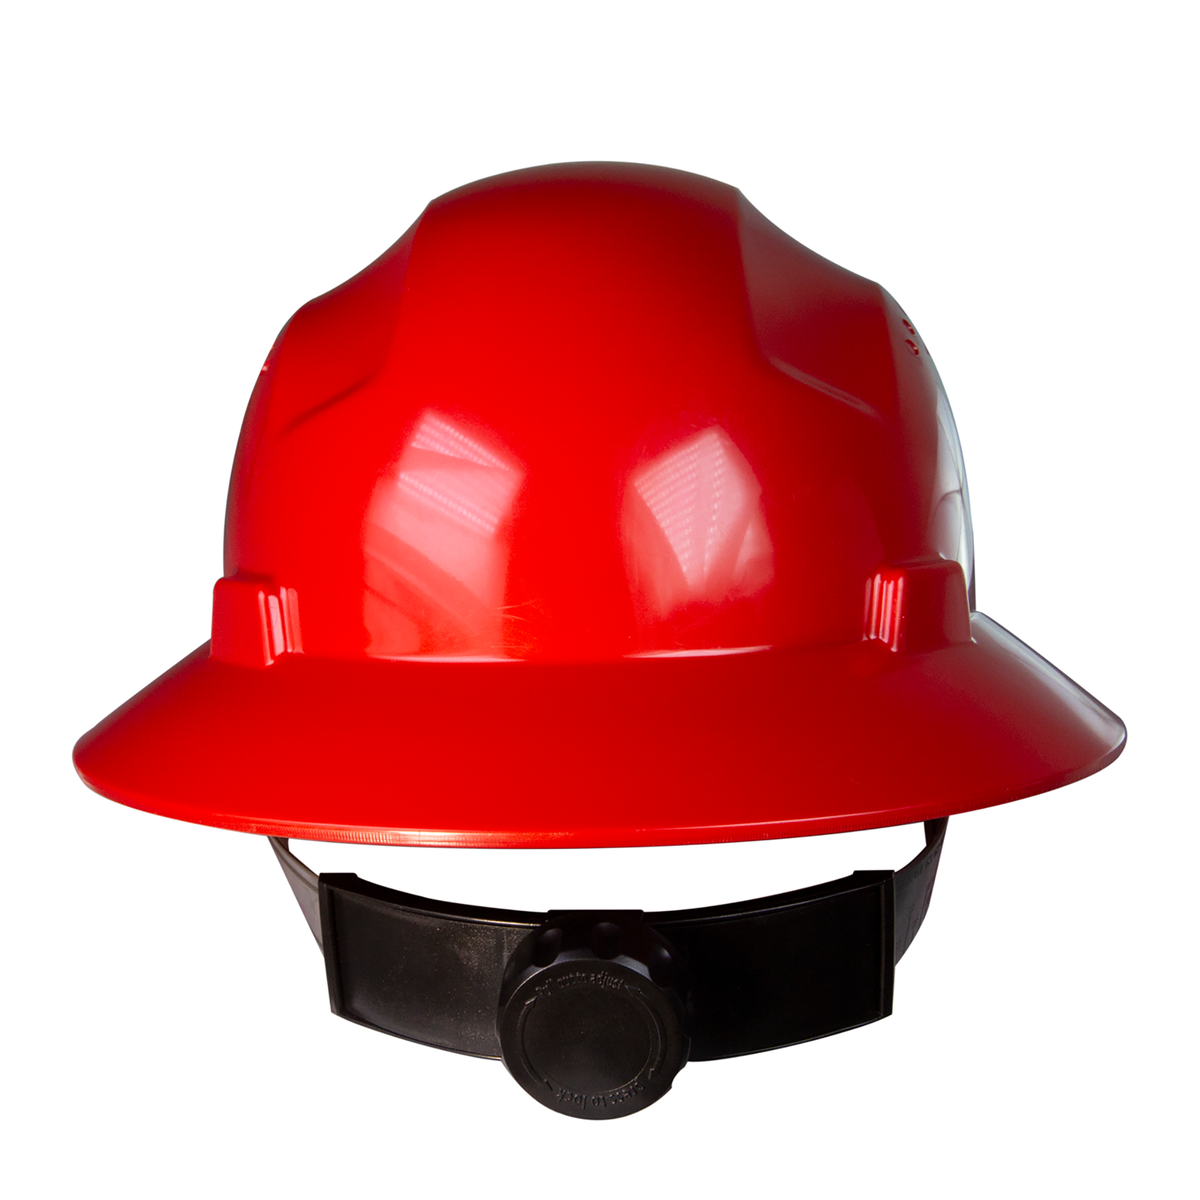 Full Brim Helmet for Impact and Electrical Protection